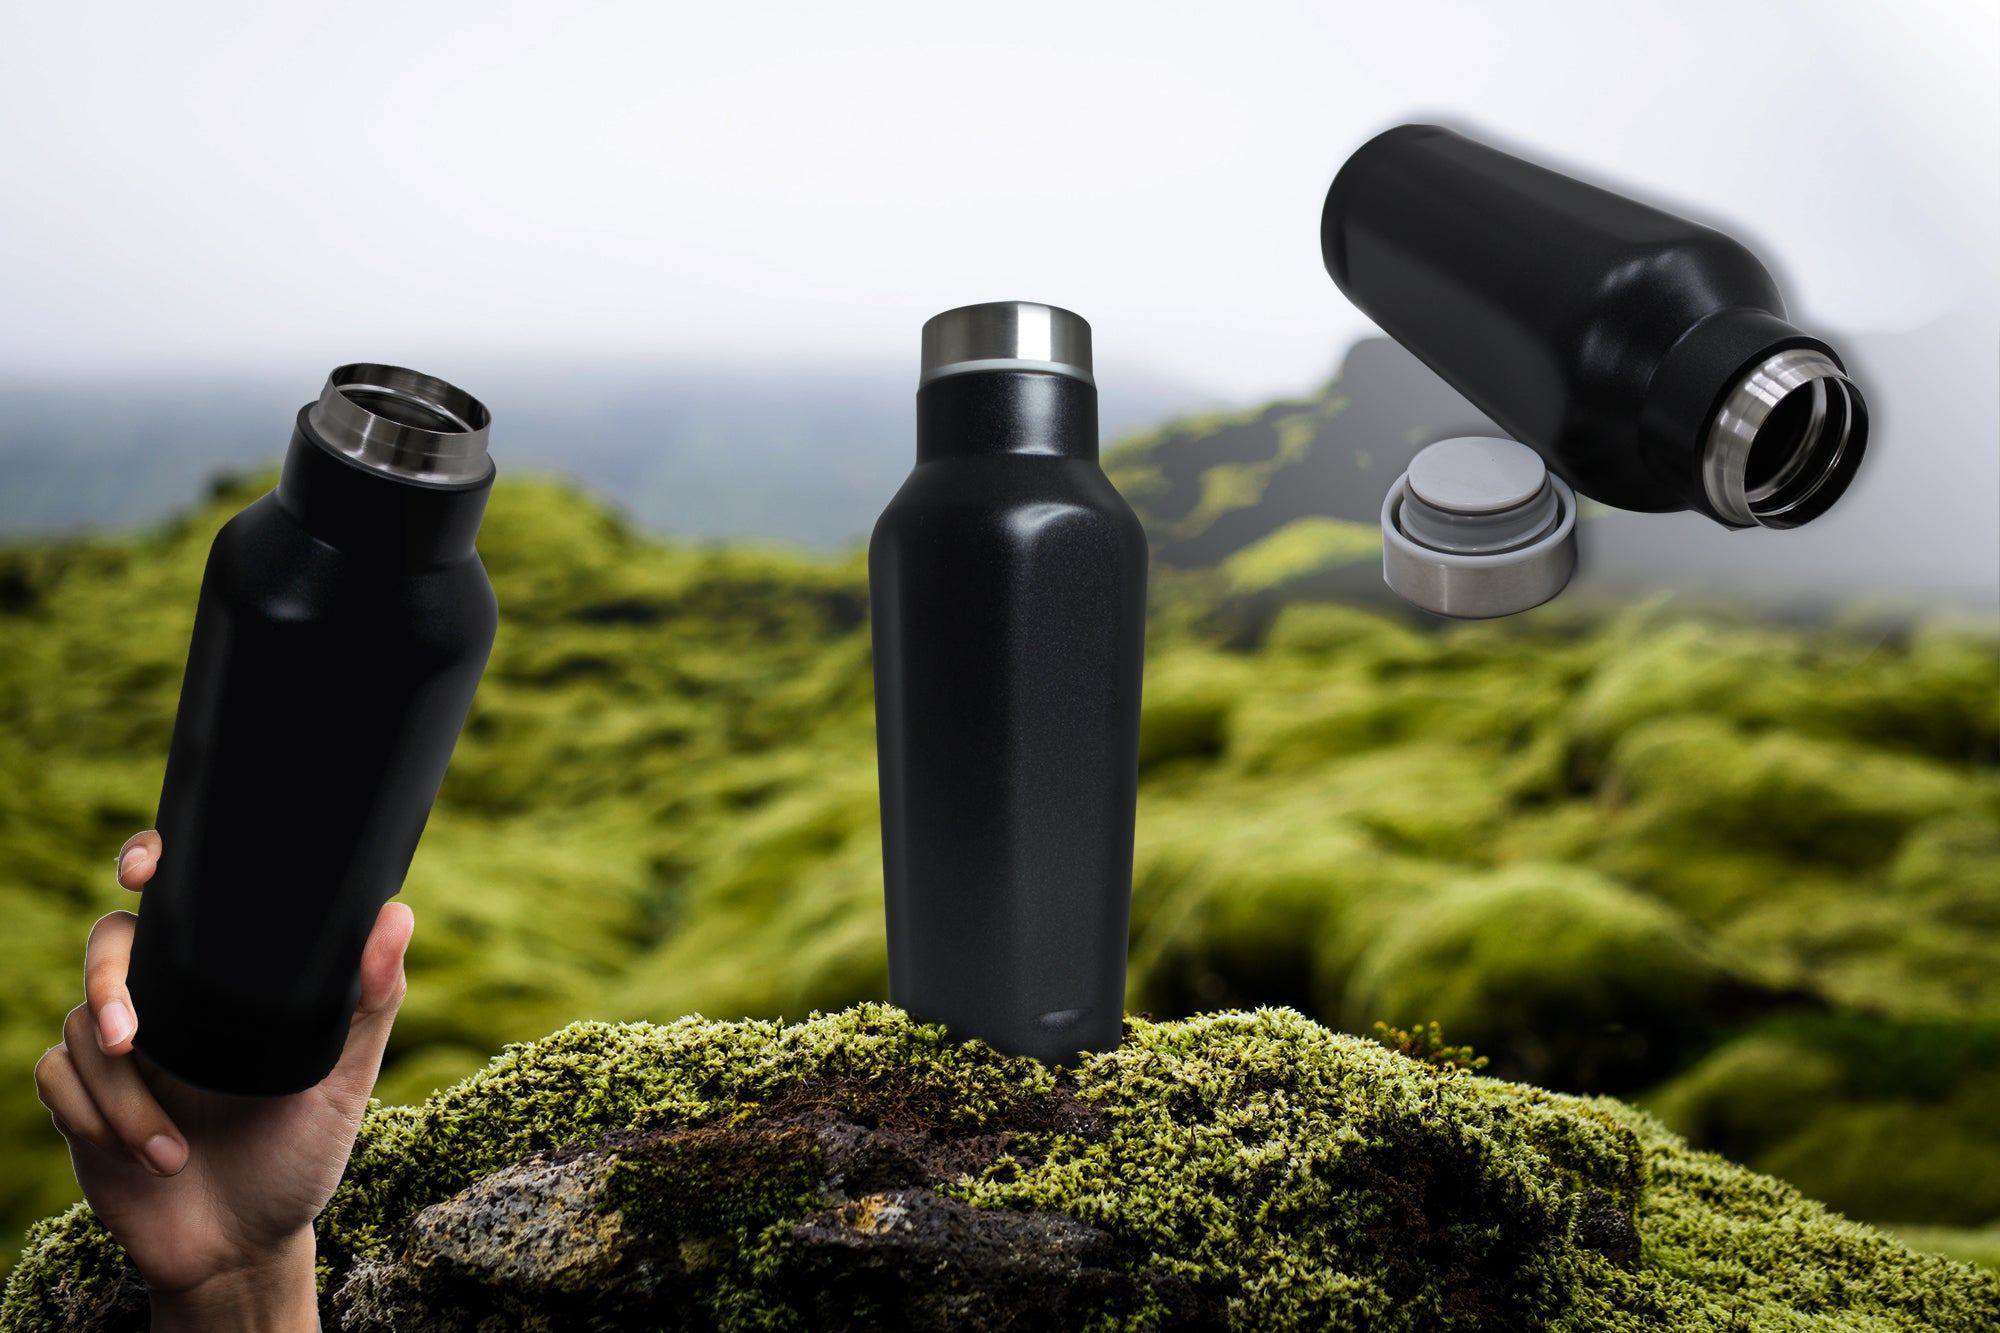 Vacuum Insulated Hot and Cold Stainless Steel Bottle - Matte Black - 360ml